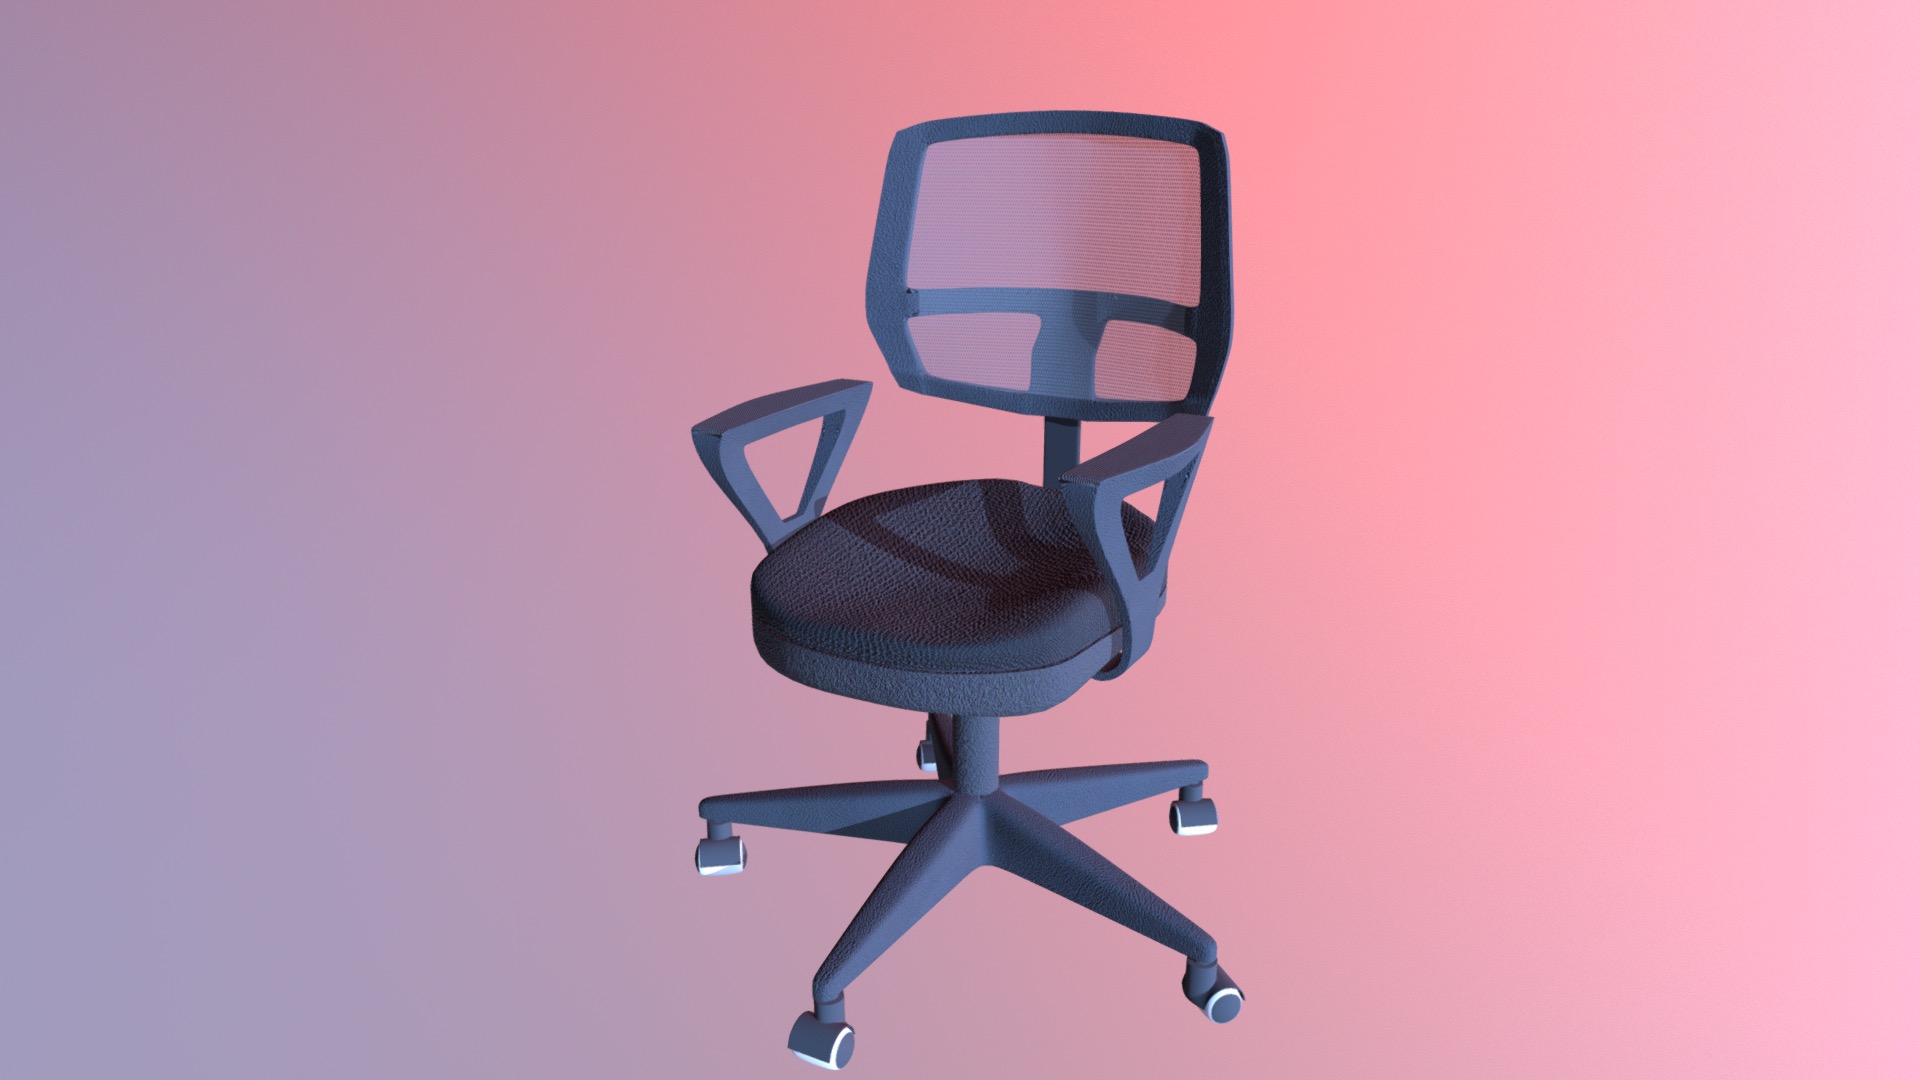 3D model Chair - This is a 3D model of the Chair. The 3D model is about a blue office chair.